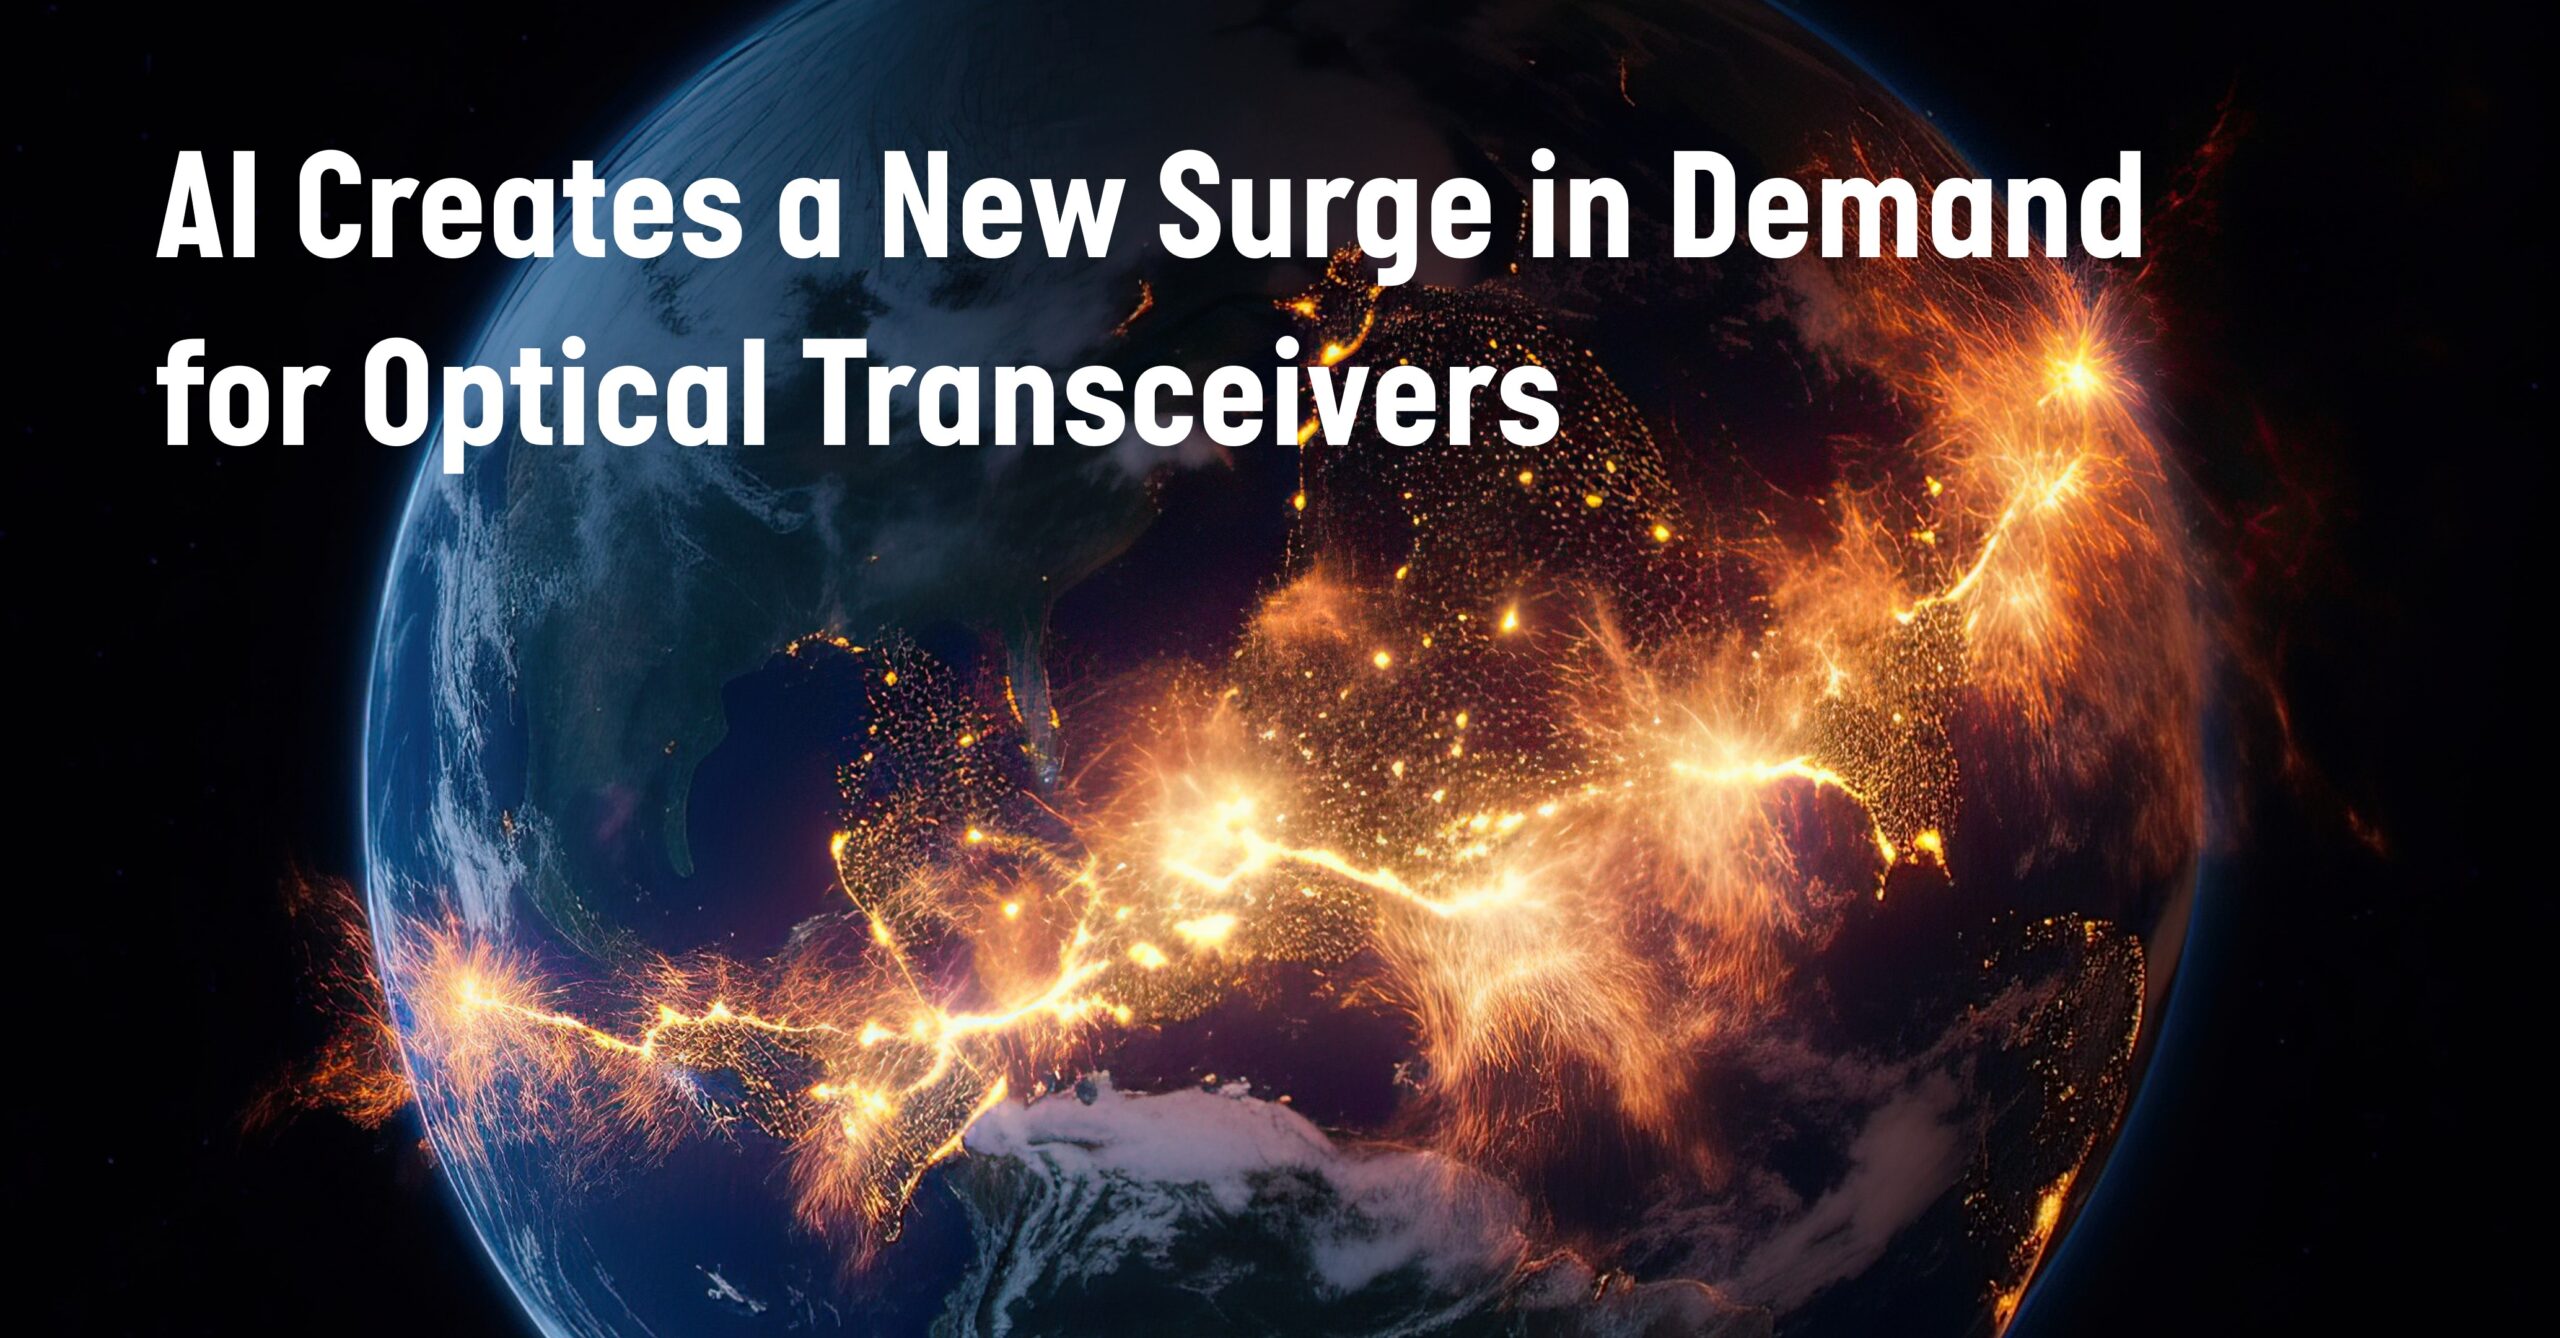 AI Creates a New Surge in Demand for Optical Transceivers